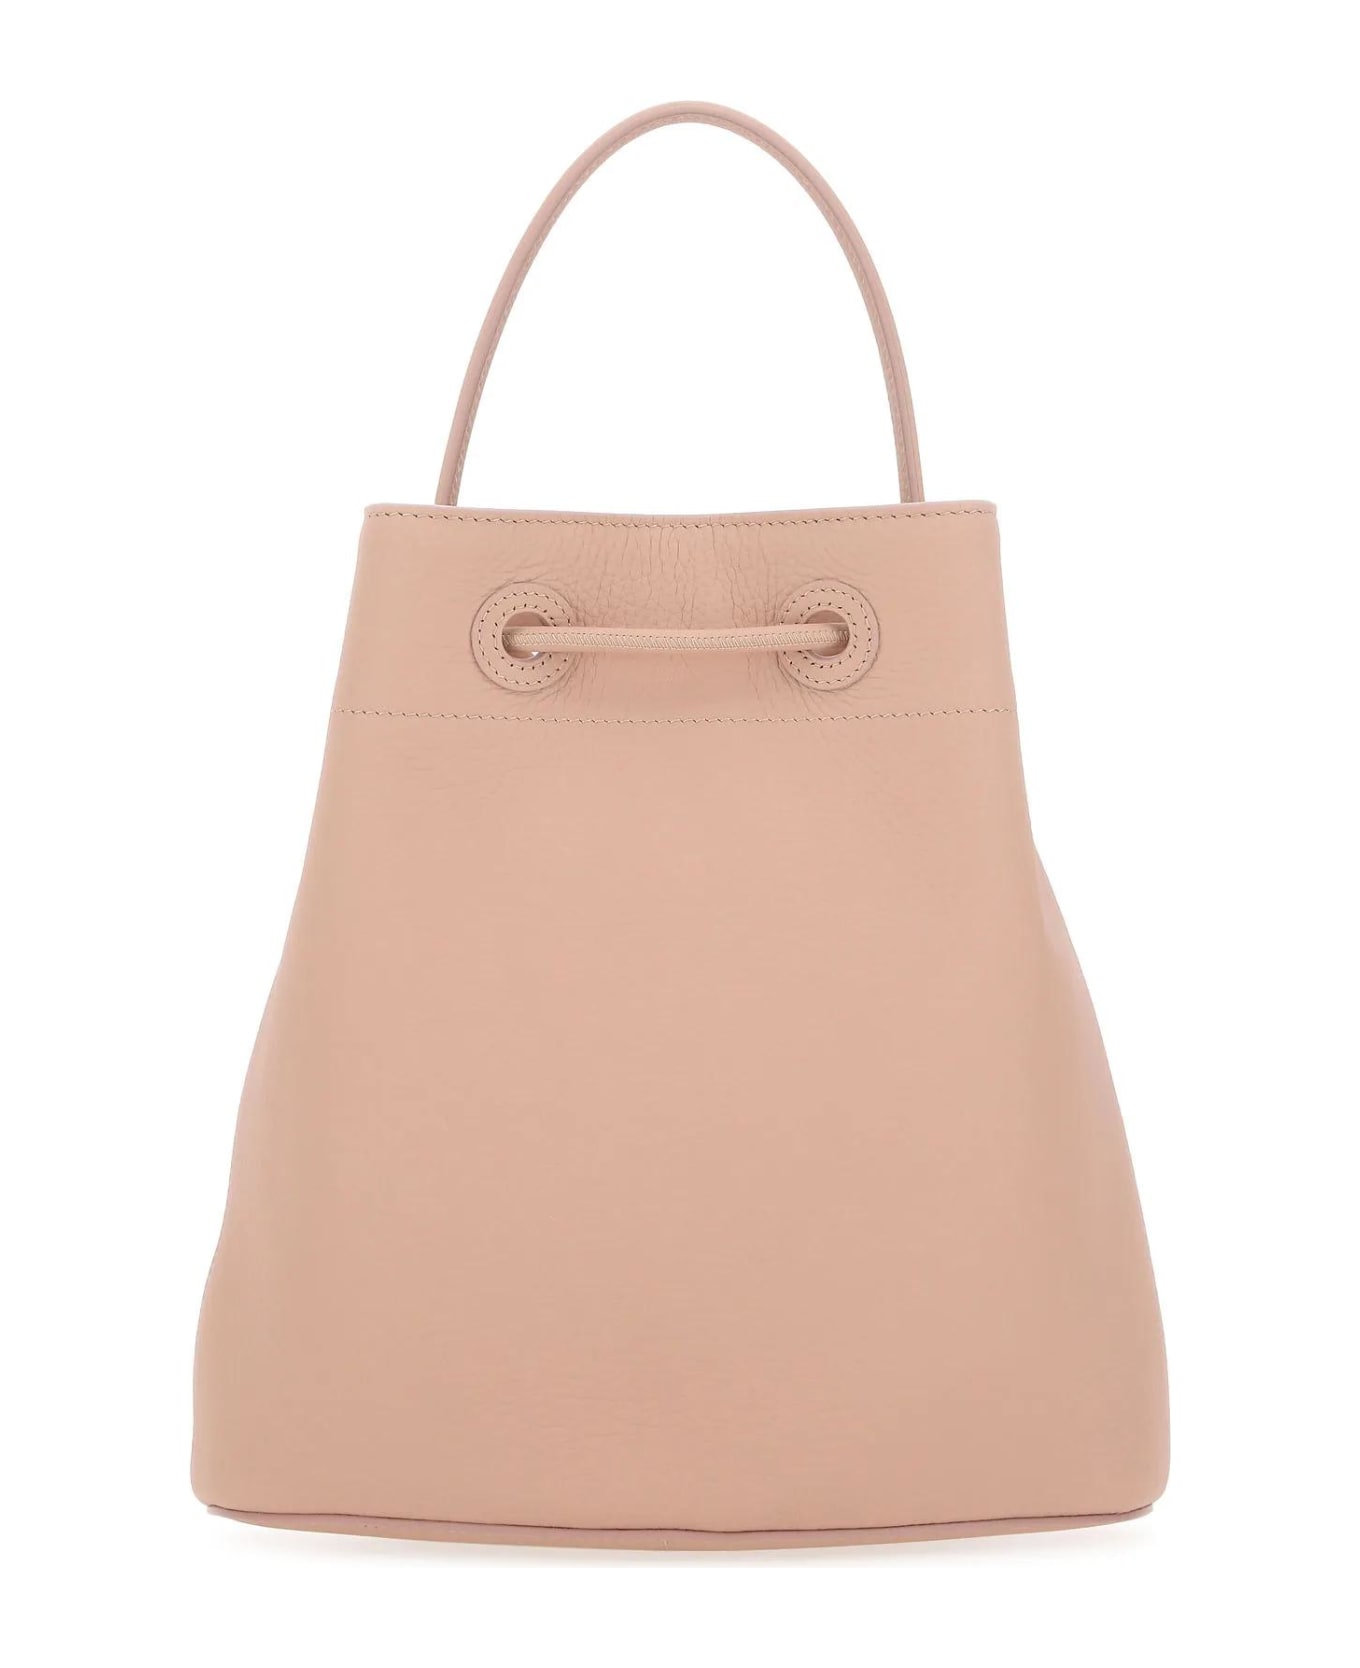 Burberry Pink Leather Small Tb Bucket Bag - A3661